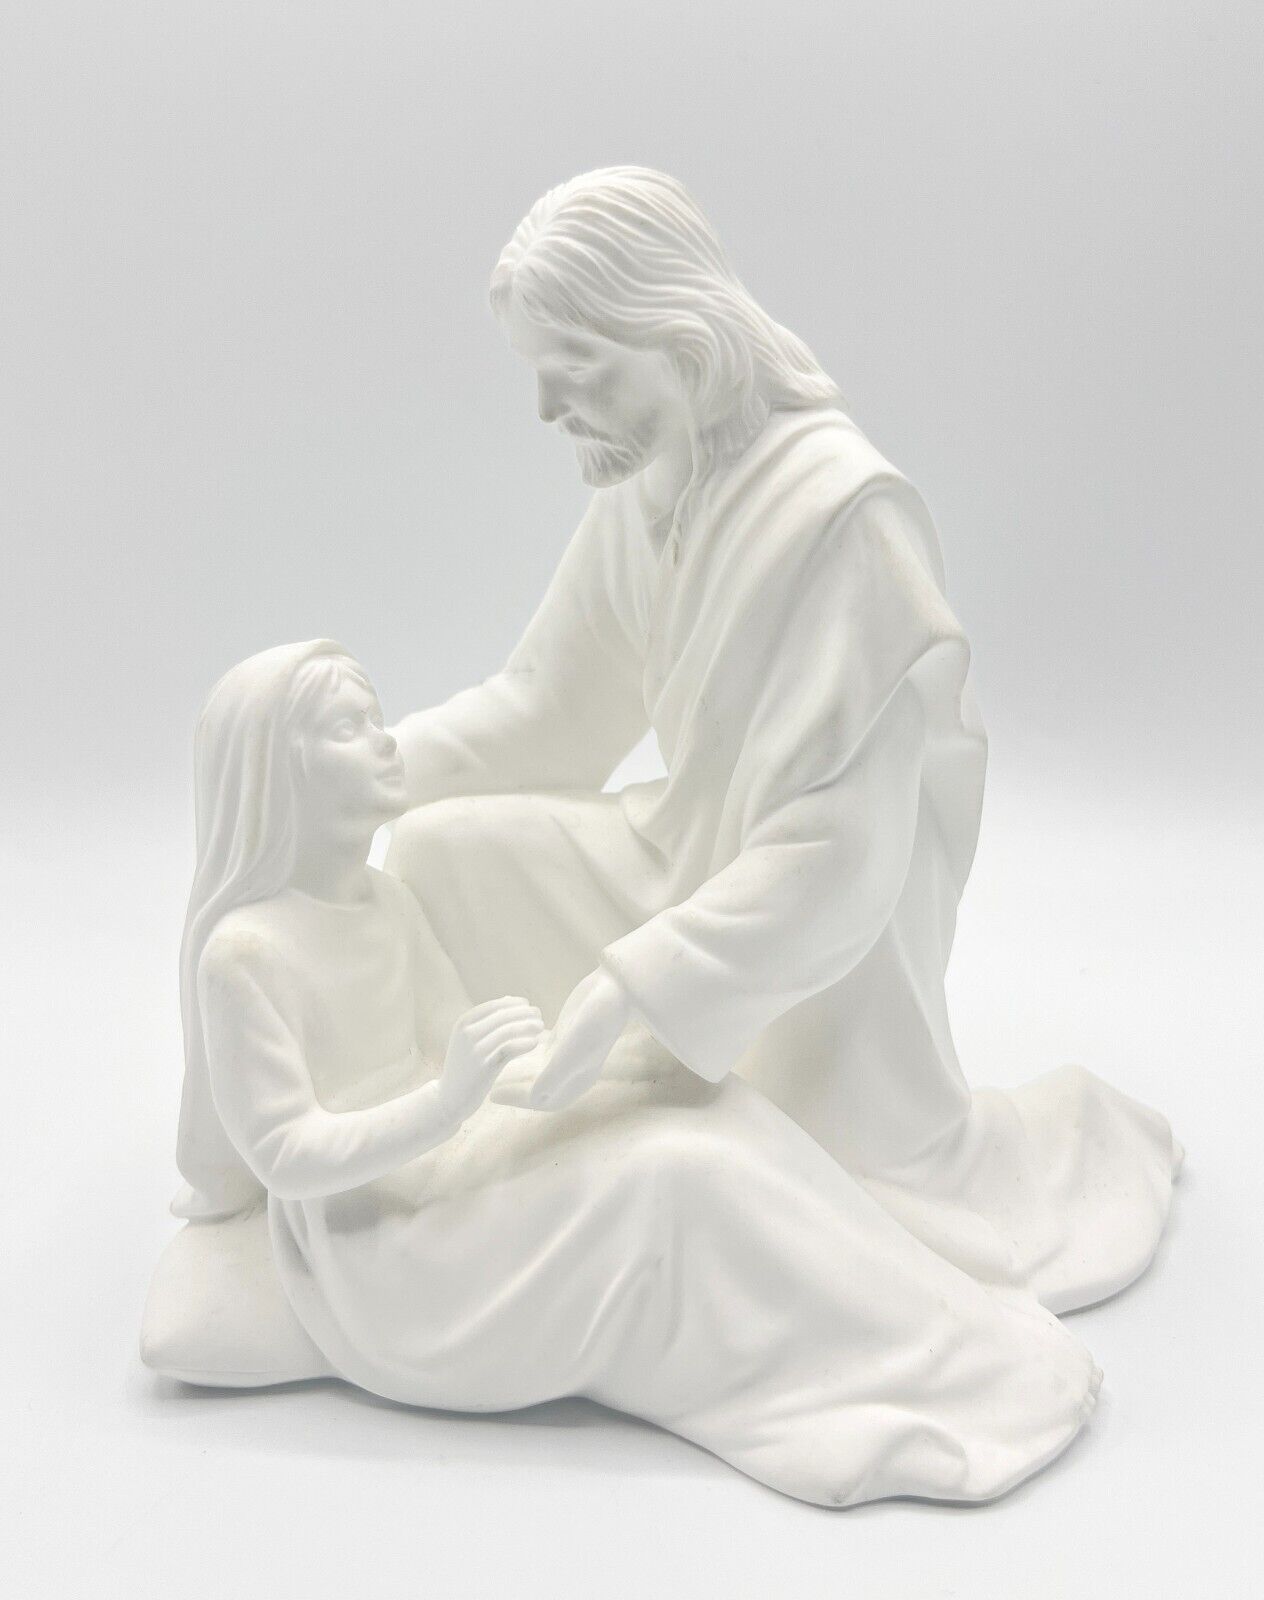 Lenox 1992 Limited Edition, Life of Christ Collection, A Child's Comfort, Jesus